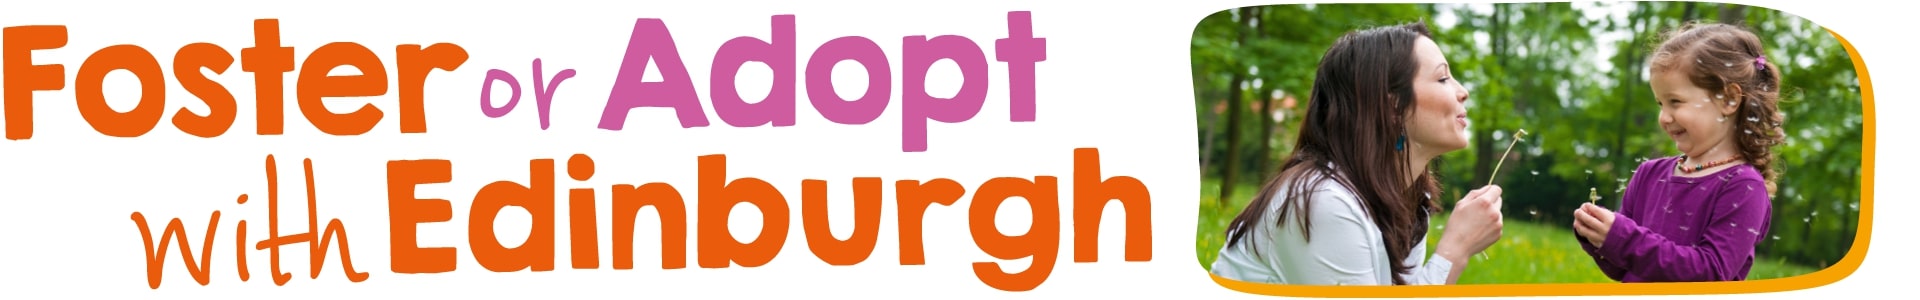 Foster or Adopt with Edinburgh Council